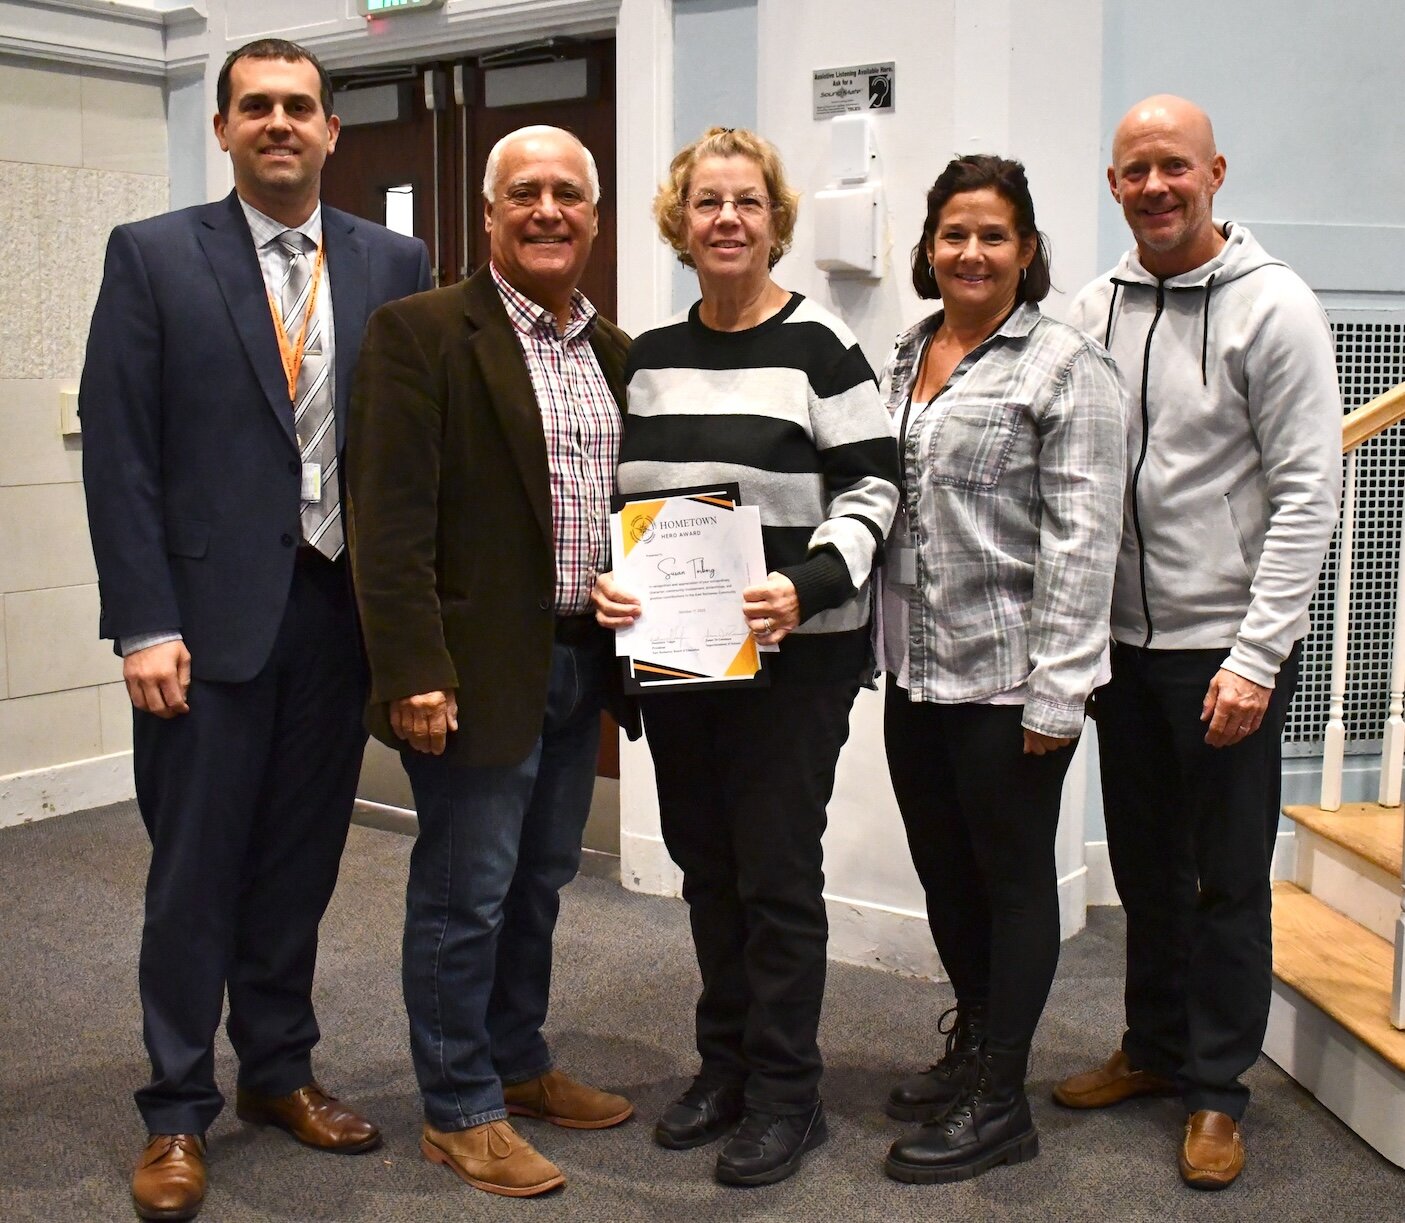 The East Rockaway Board of Education recognized Susan Torborg as the October ‘Hometown Hero’ during the Nov. 14 board meeting. Torborg has served as an office clerk, a lunch monitor, a security guard, an athletic supervisor and more during her decades-long career with the district. Now a grandmother of 8, she retired earlier this year — but still comes into the office to help out.